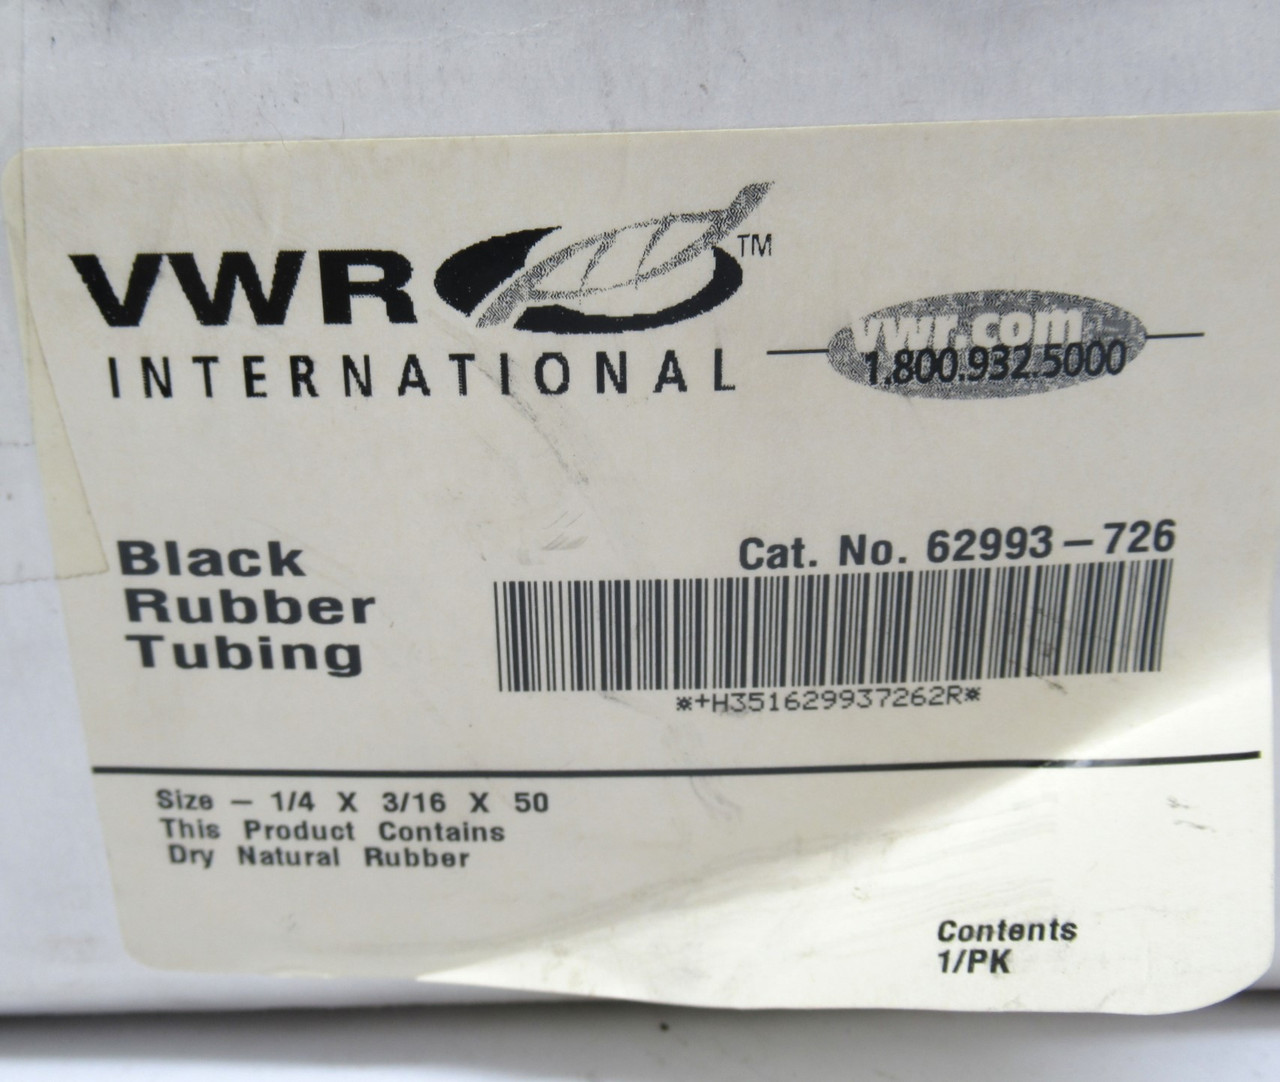 VWR International 62993-726 Rubber Tubing 1/4x3/16x38Ft *Length Removed* NEW